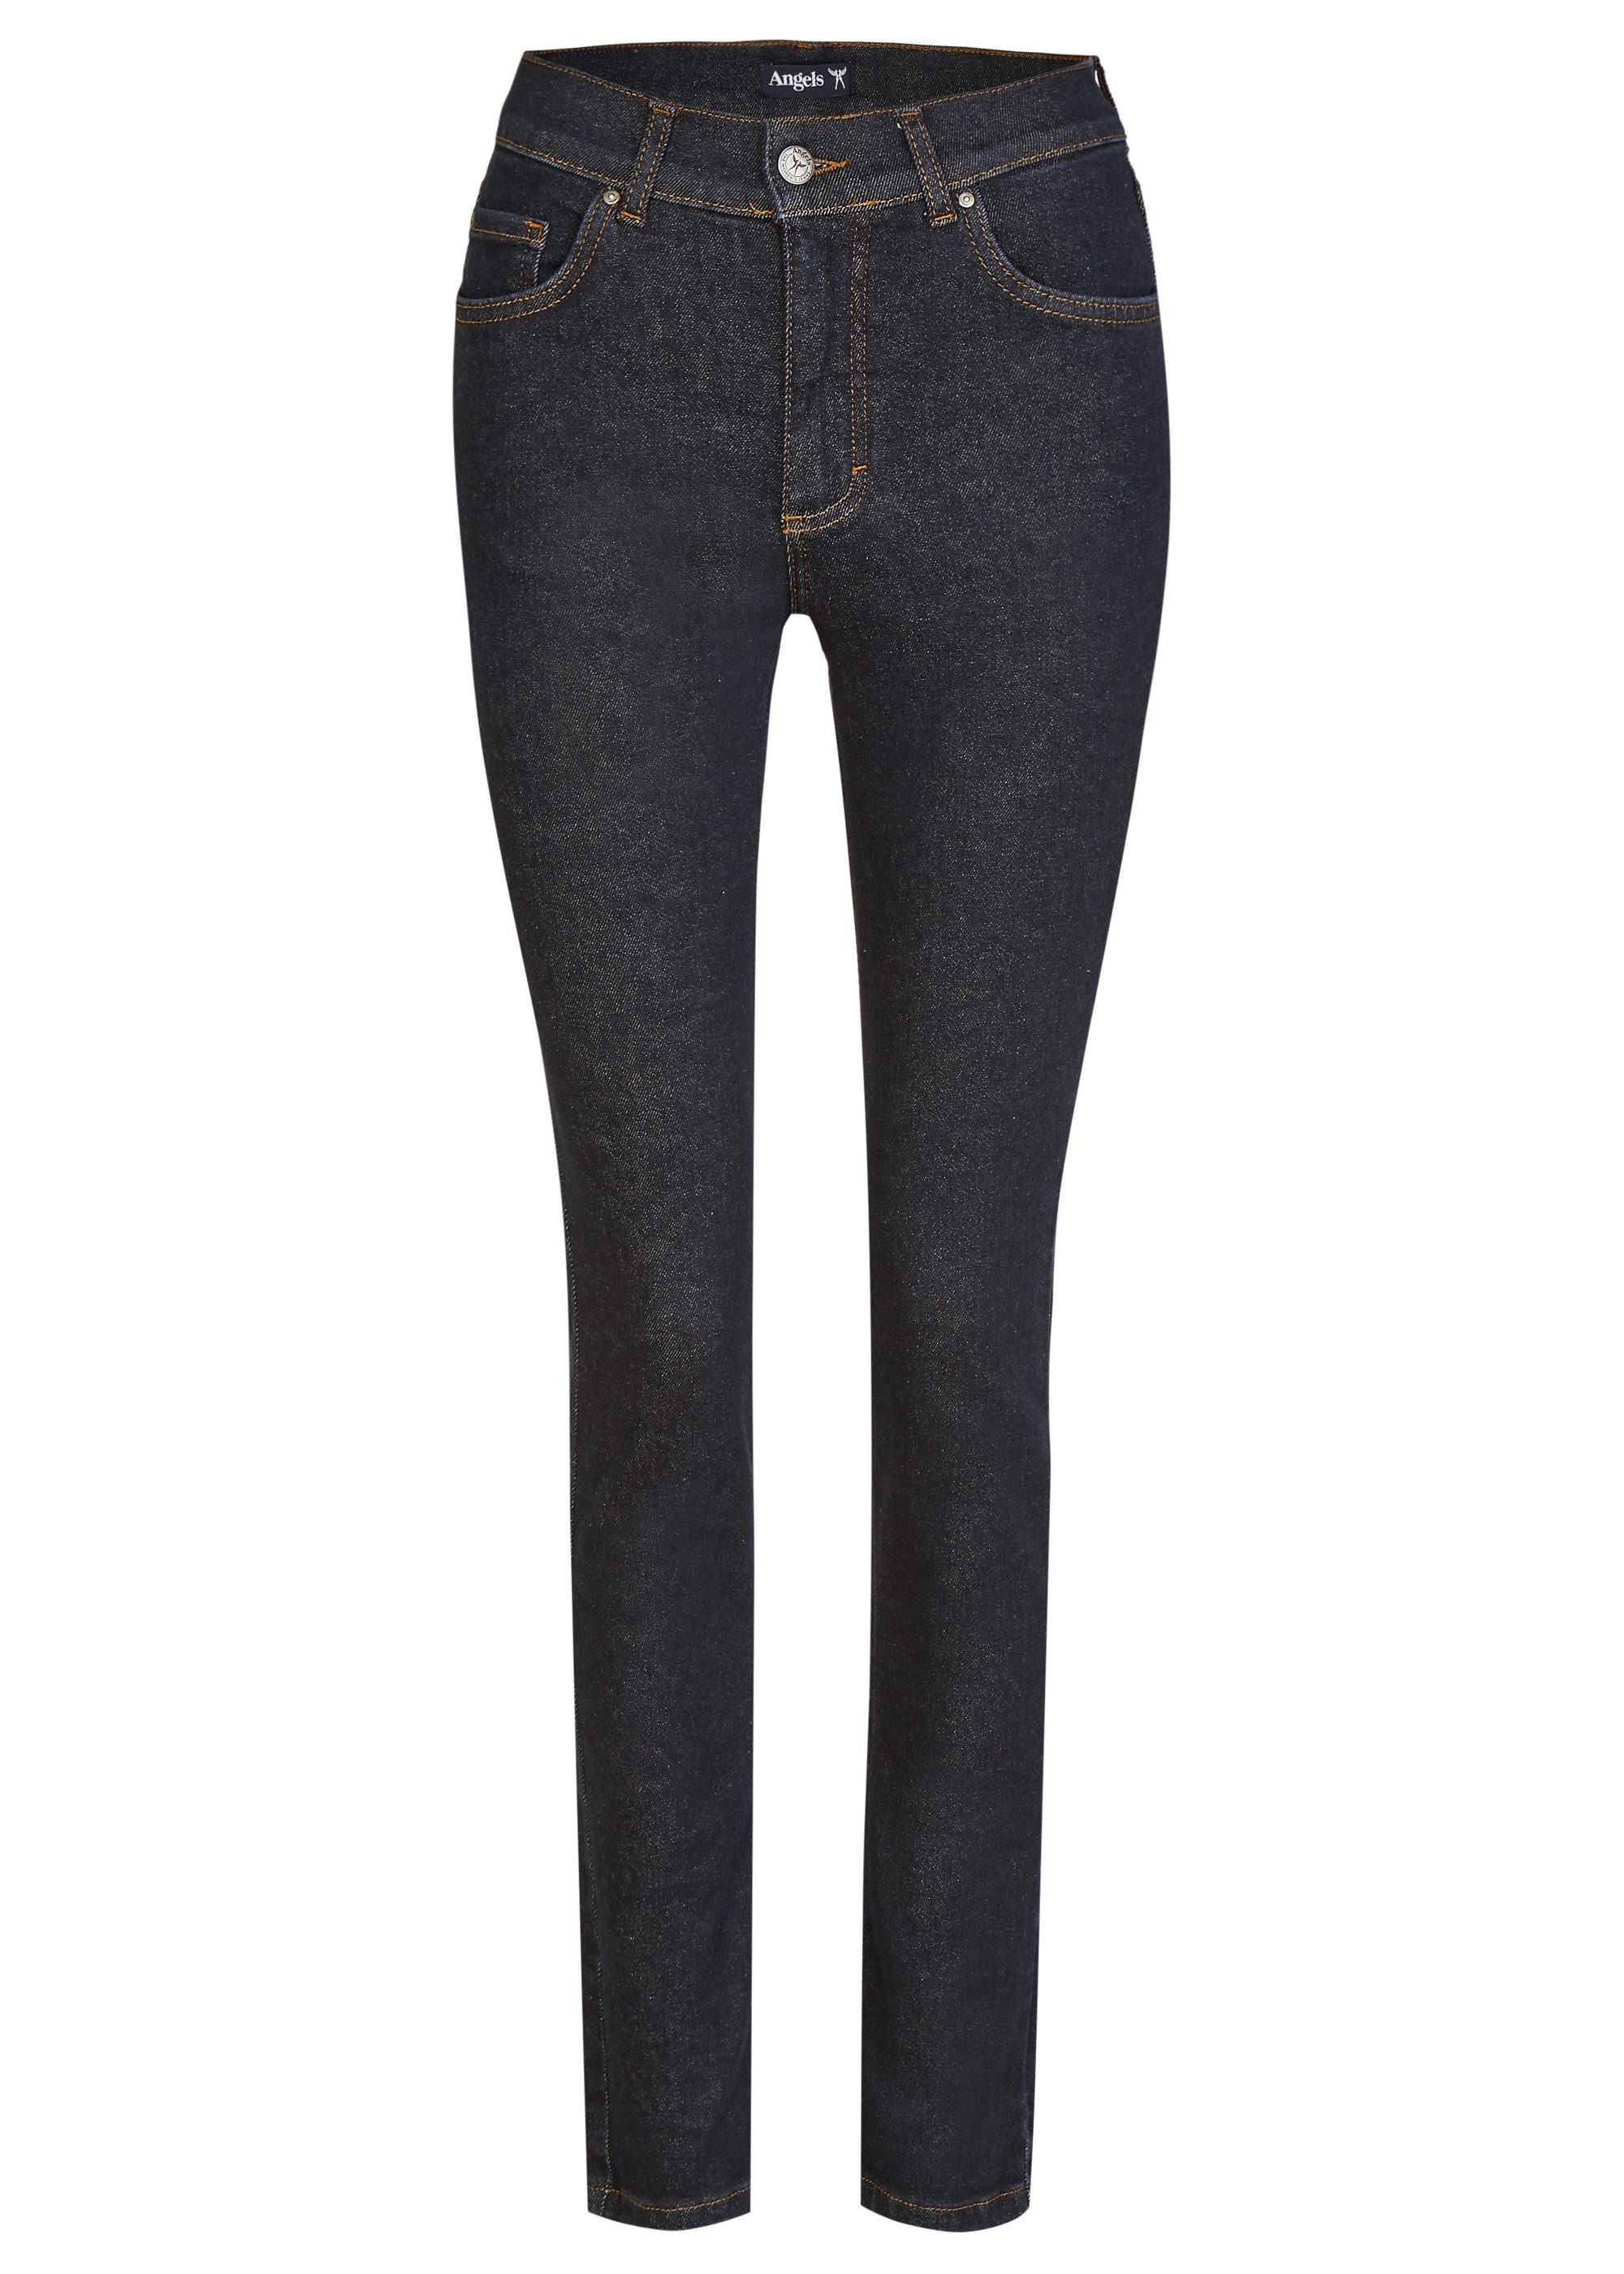 blue night - 325 STRETCH Stretch-Jeans 12.30 SKINNY JEANS ANGELS ANGELS